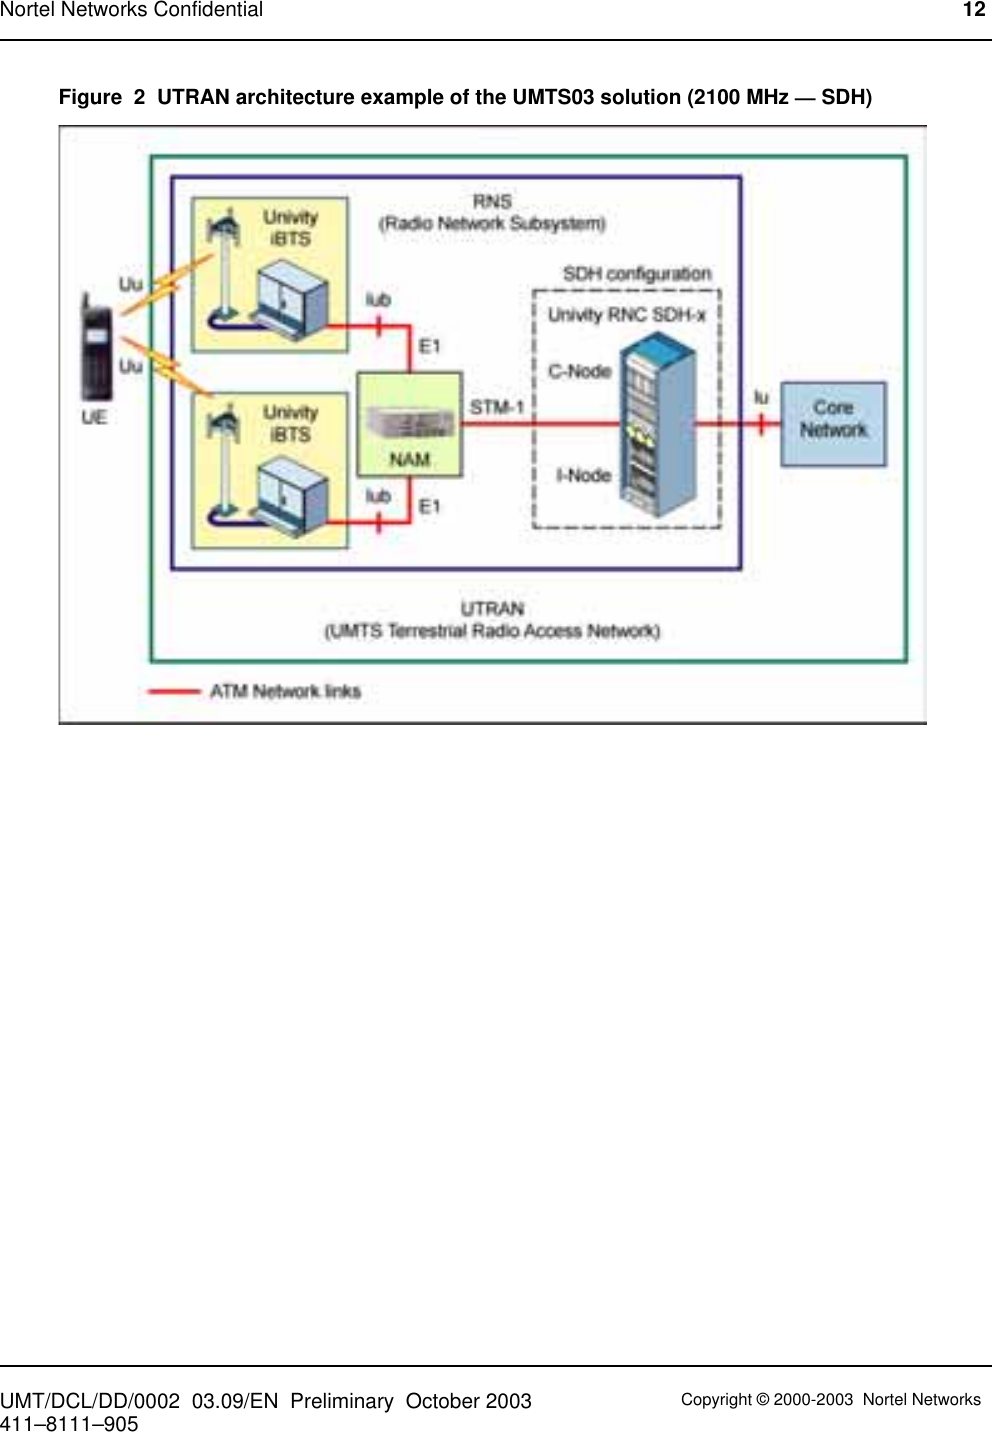 Figure 2 UTRAN architecture example of the UMTS03 solution (2100 MHz —SDH)Nortel Networks Confidential 12UMT/DCL/DD/0002 03.09/EN Preliminary October 2003 Copyright © 2000-2003 Nortel Networks411–8111–905